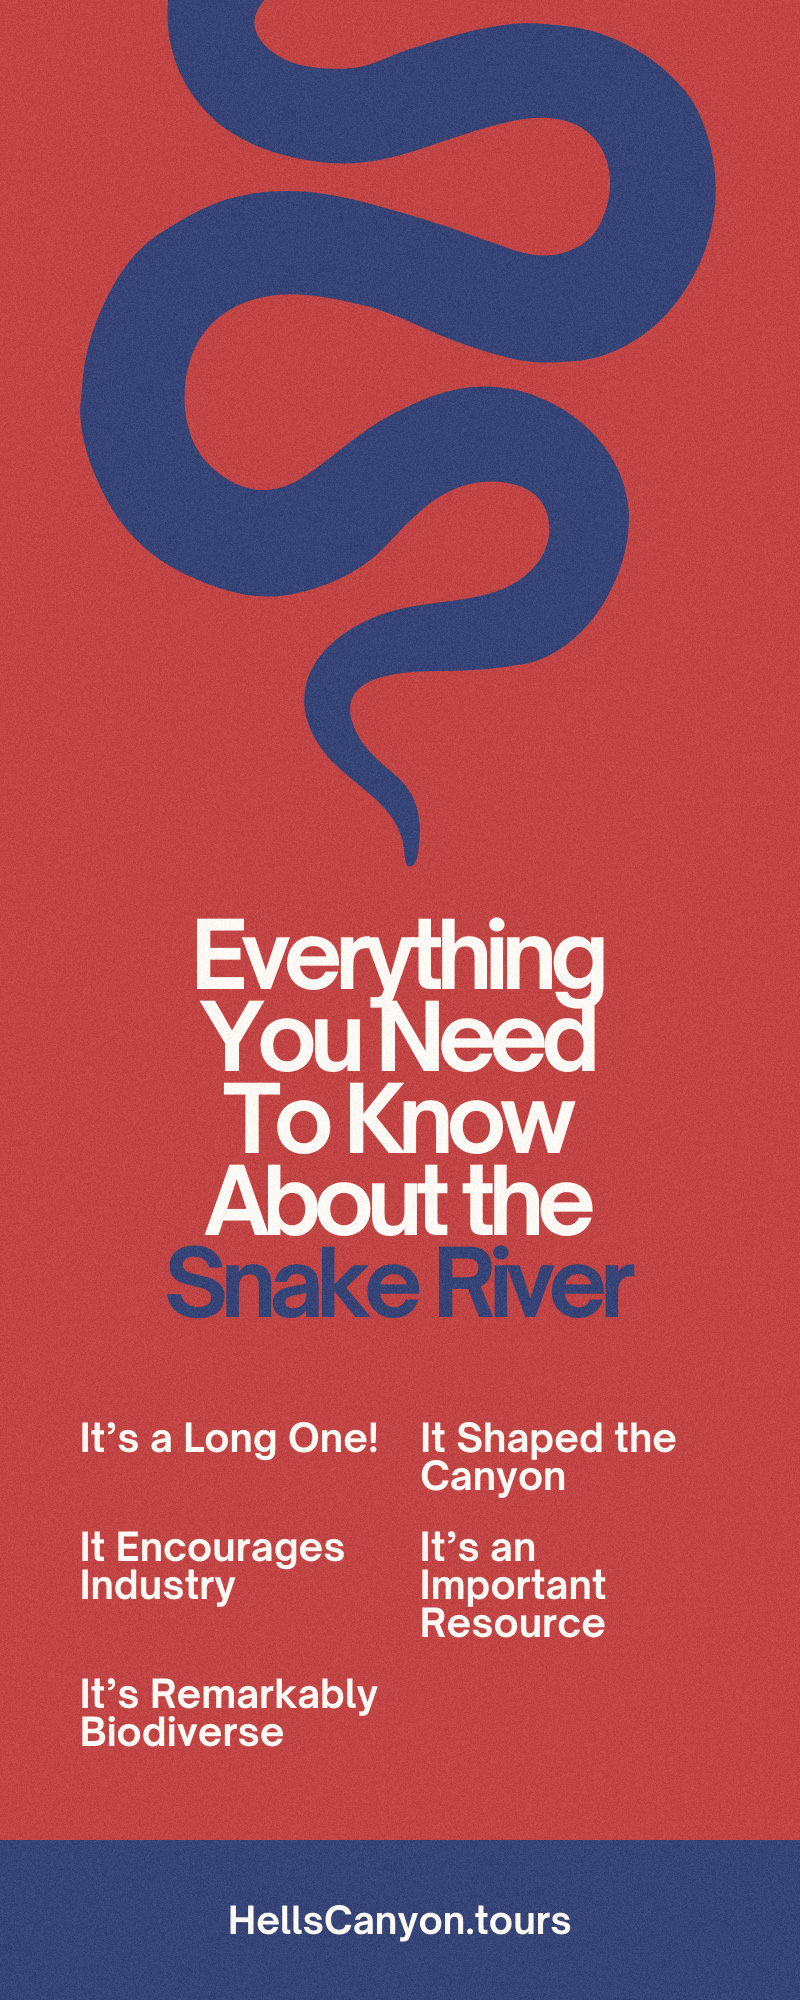 Everything You Need To Know About the Snake River